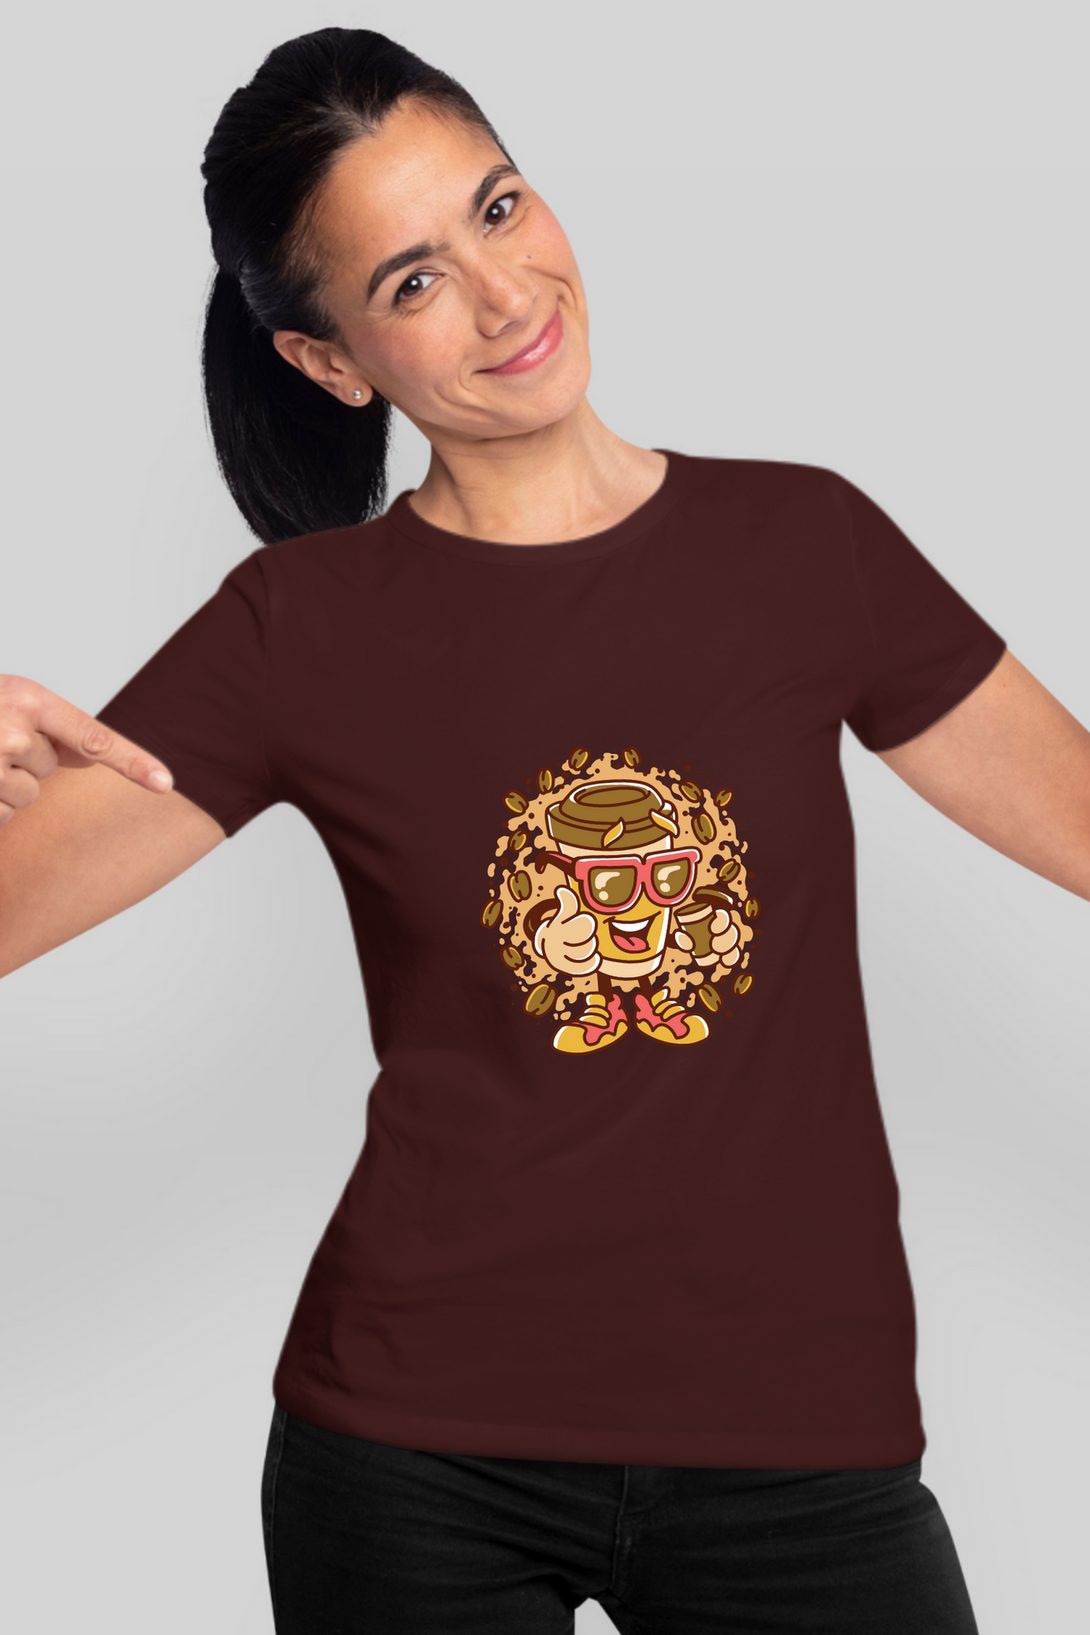 Cup With Coffee Beans Printed T-Shirt For Women - WowWaves - 10